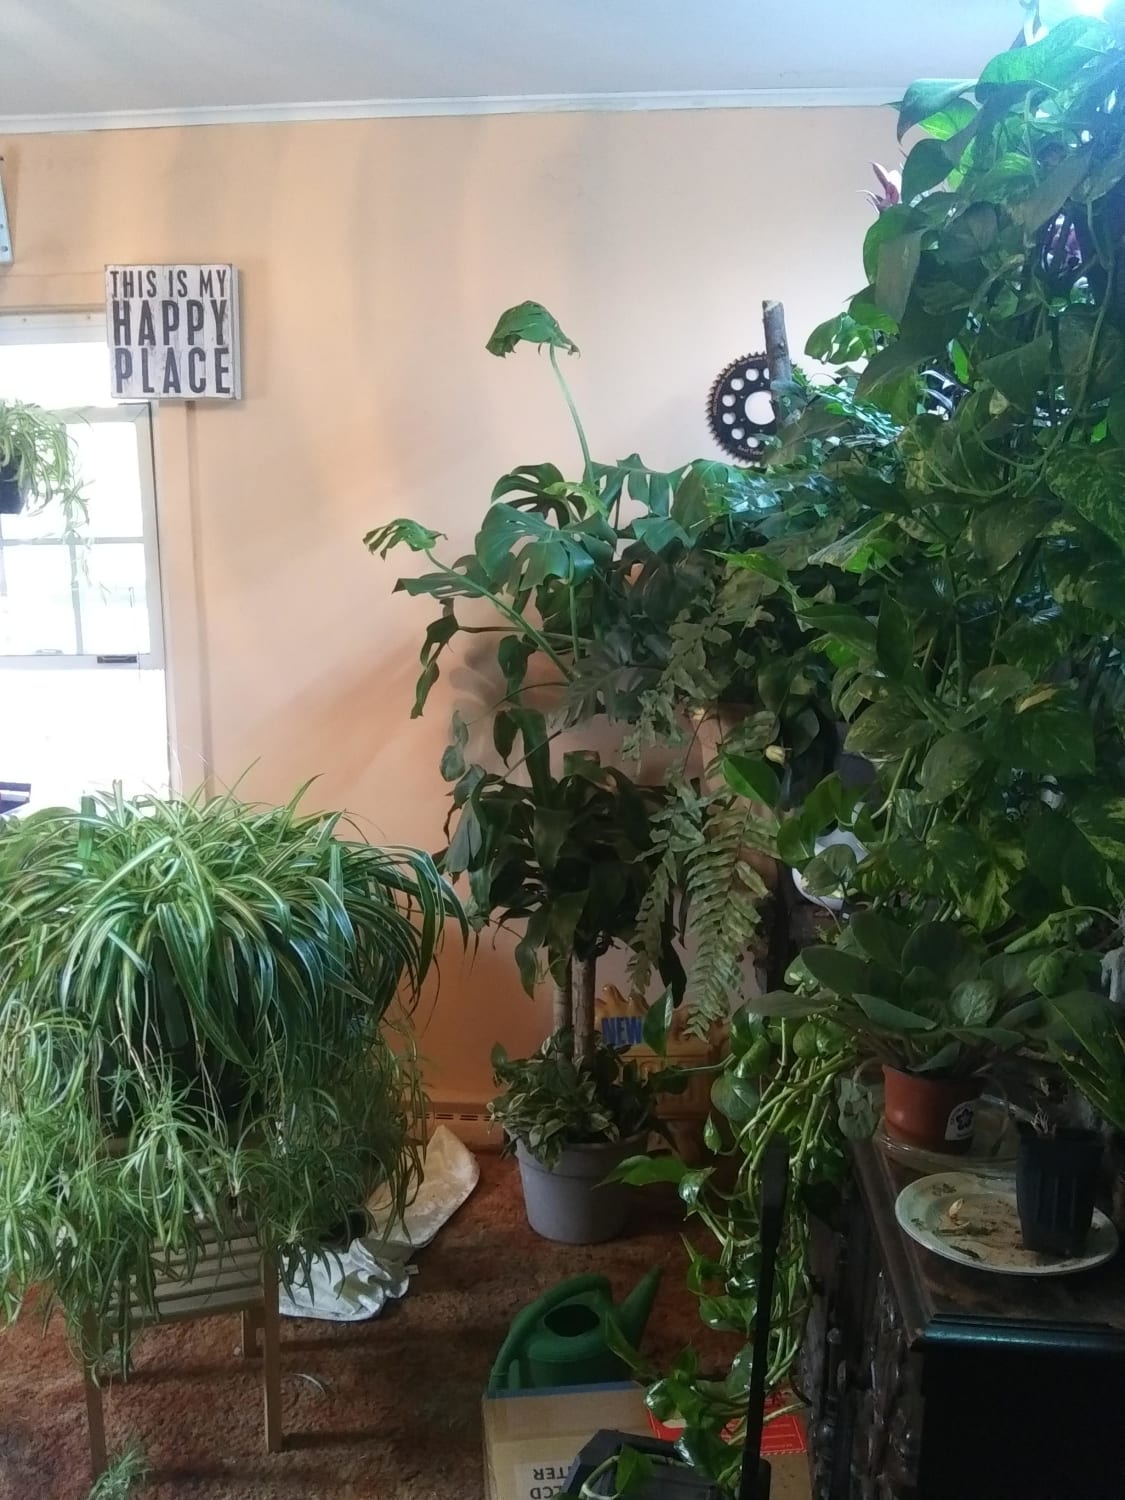 Since all of my plants are tropicals, I ask Alexa every morning for the weather in a tropical location, like the Philippines or Indonesia. If it's raining, I water them. If it's cloudy, I leave the lights off. If it's windy, I turn a fan on. If it's sunny, they get lights for 14 hours.